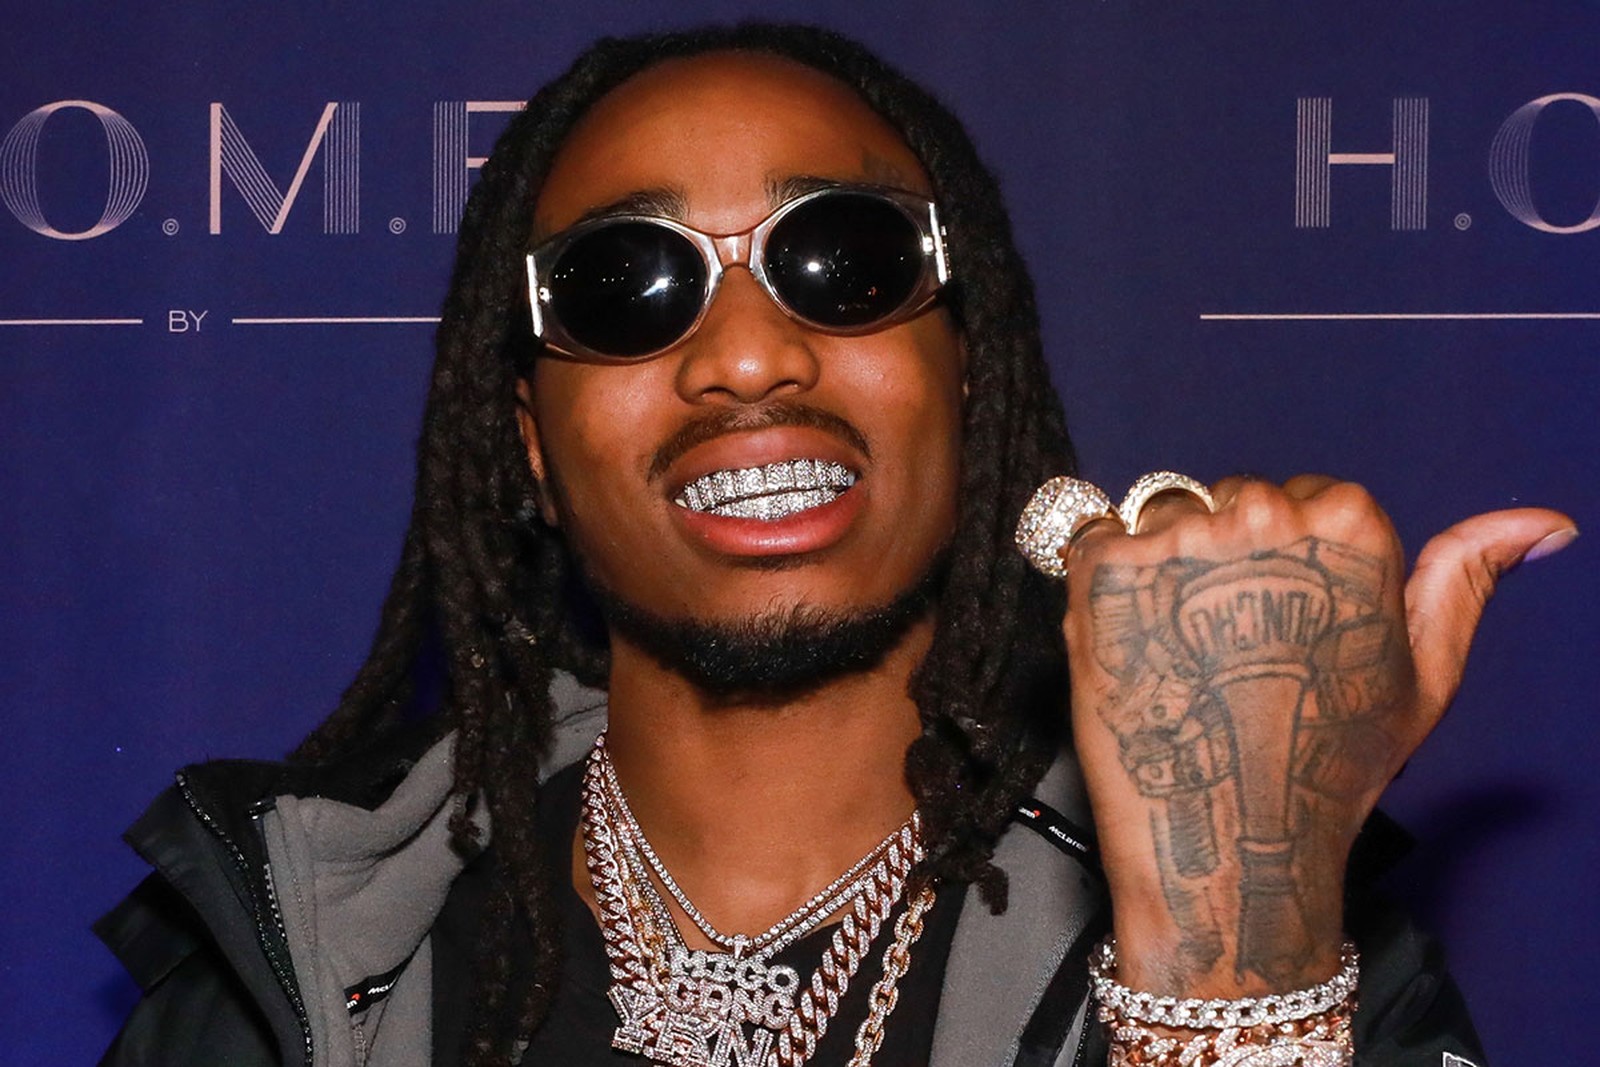 8 Things You Probably Didn't Know About Quavo